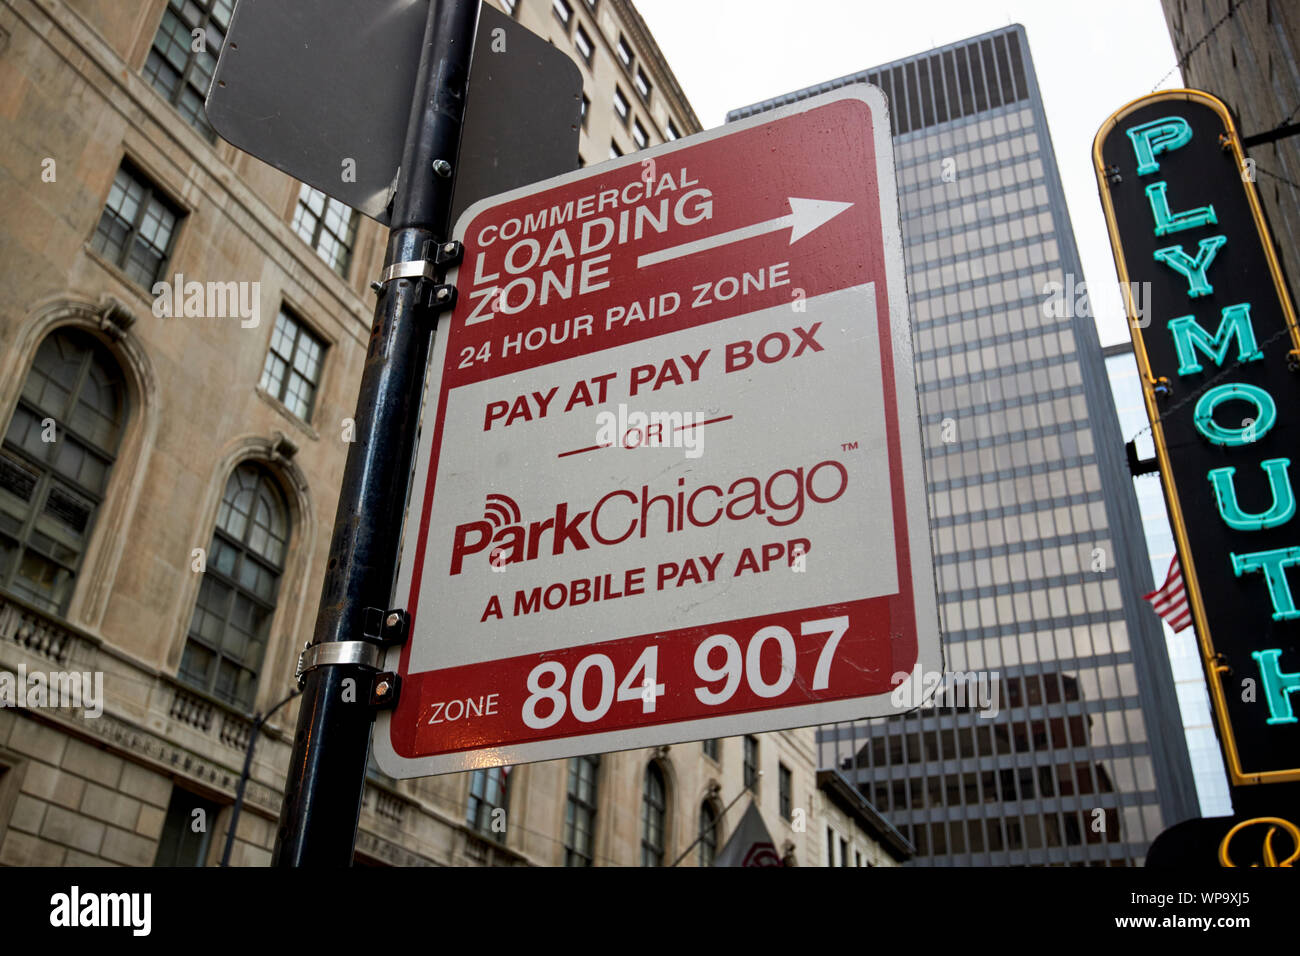 commercial loading zone 24 hour paid zone mobile pay app sign Chicago Illinois USA Stock Photo